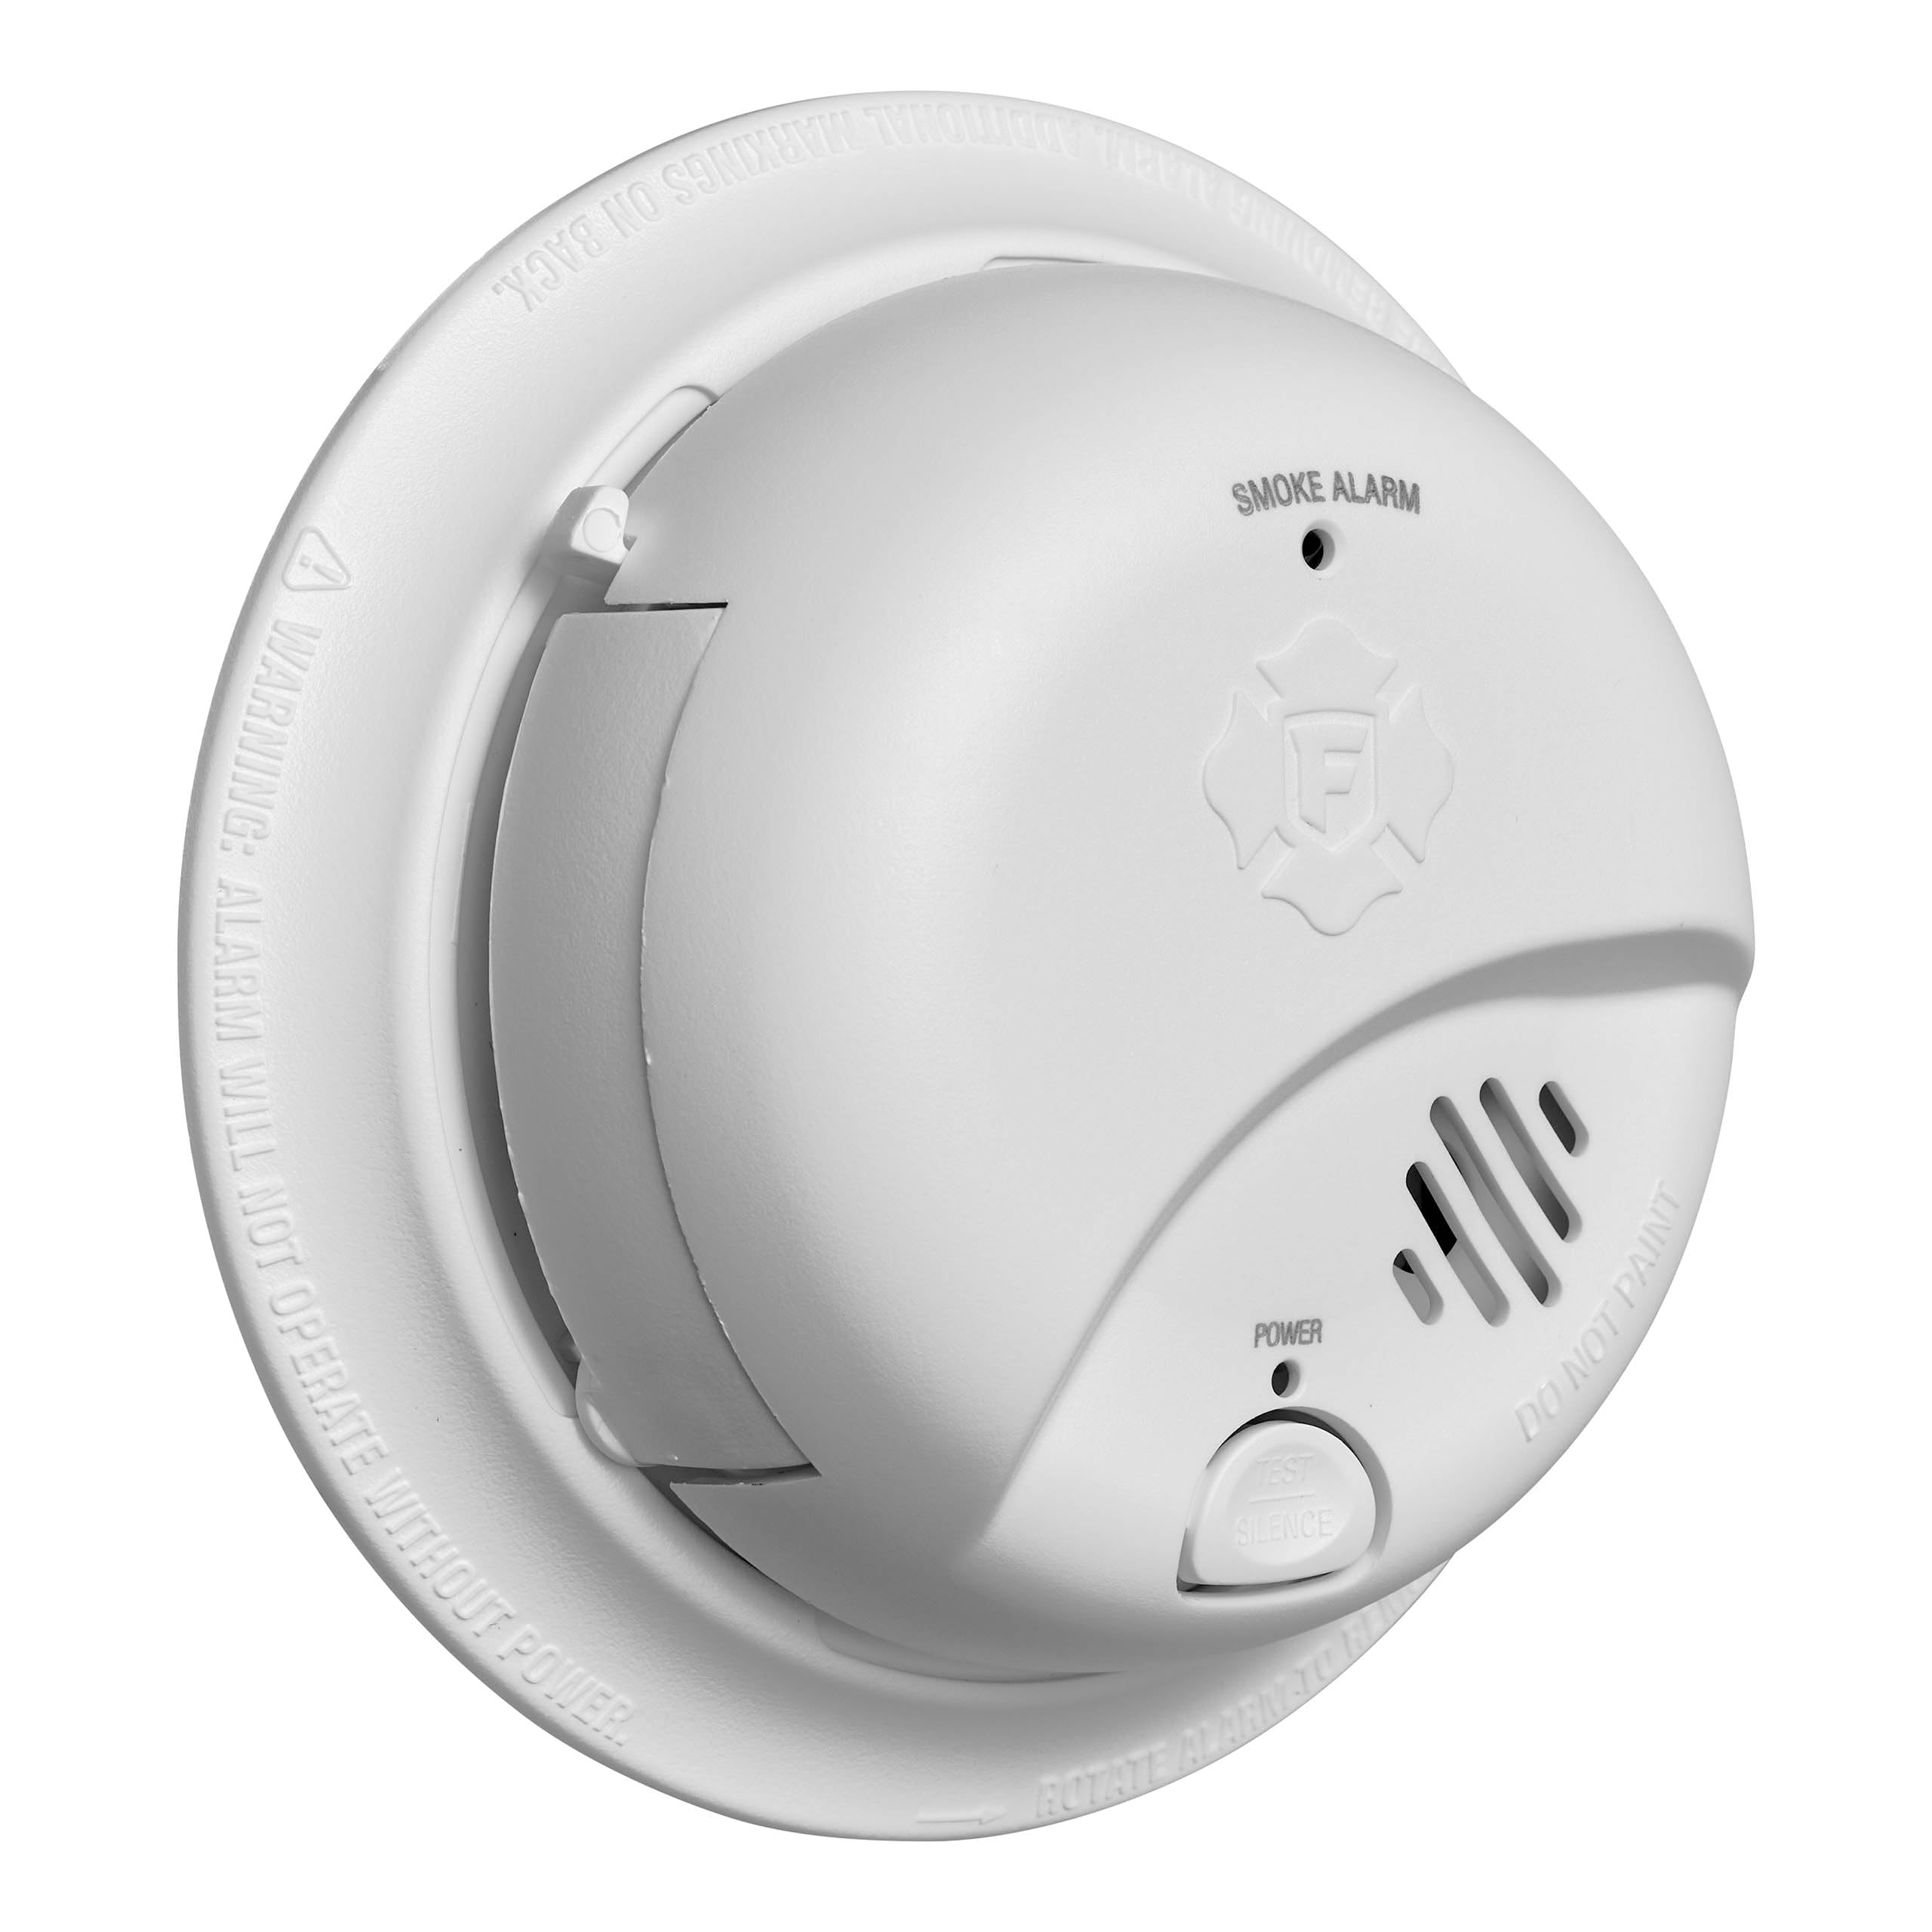 First Alert SMI100, Battery-Operated Smoke Alarm, 1-Pack